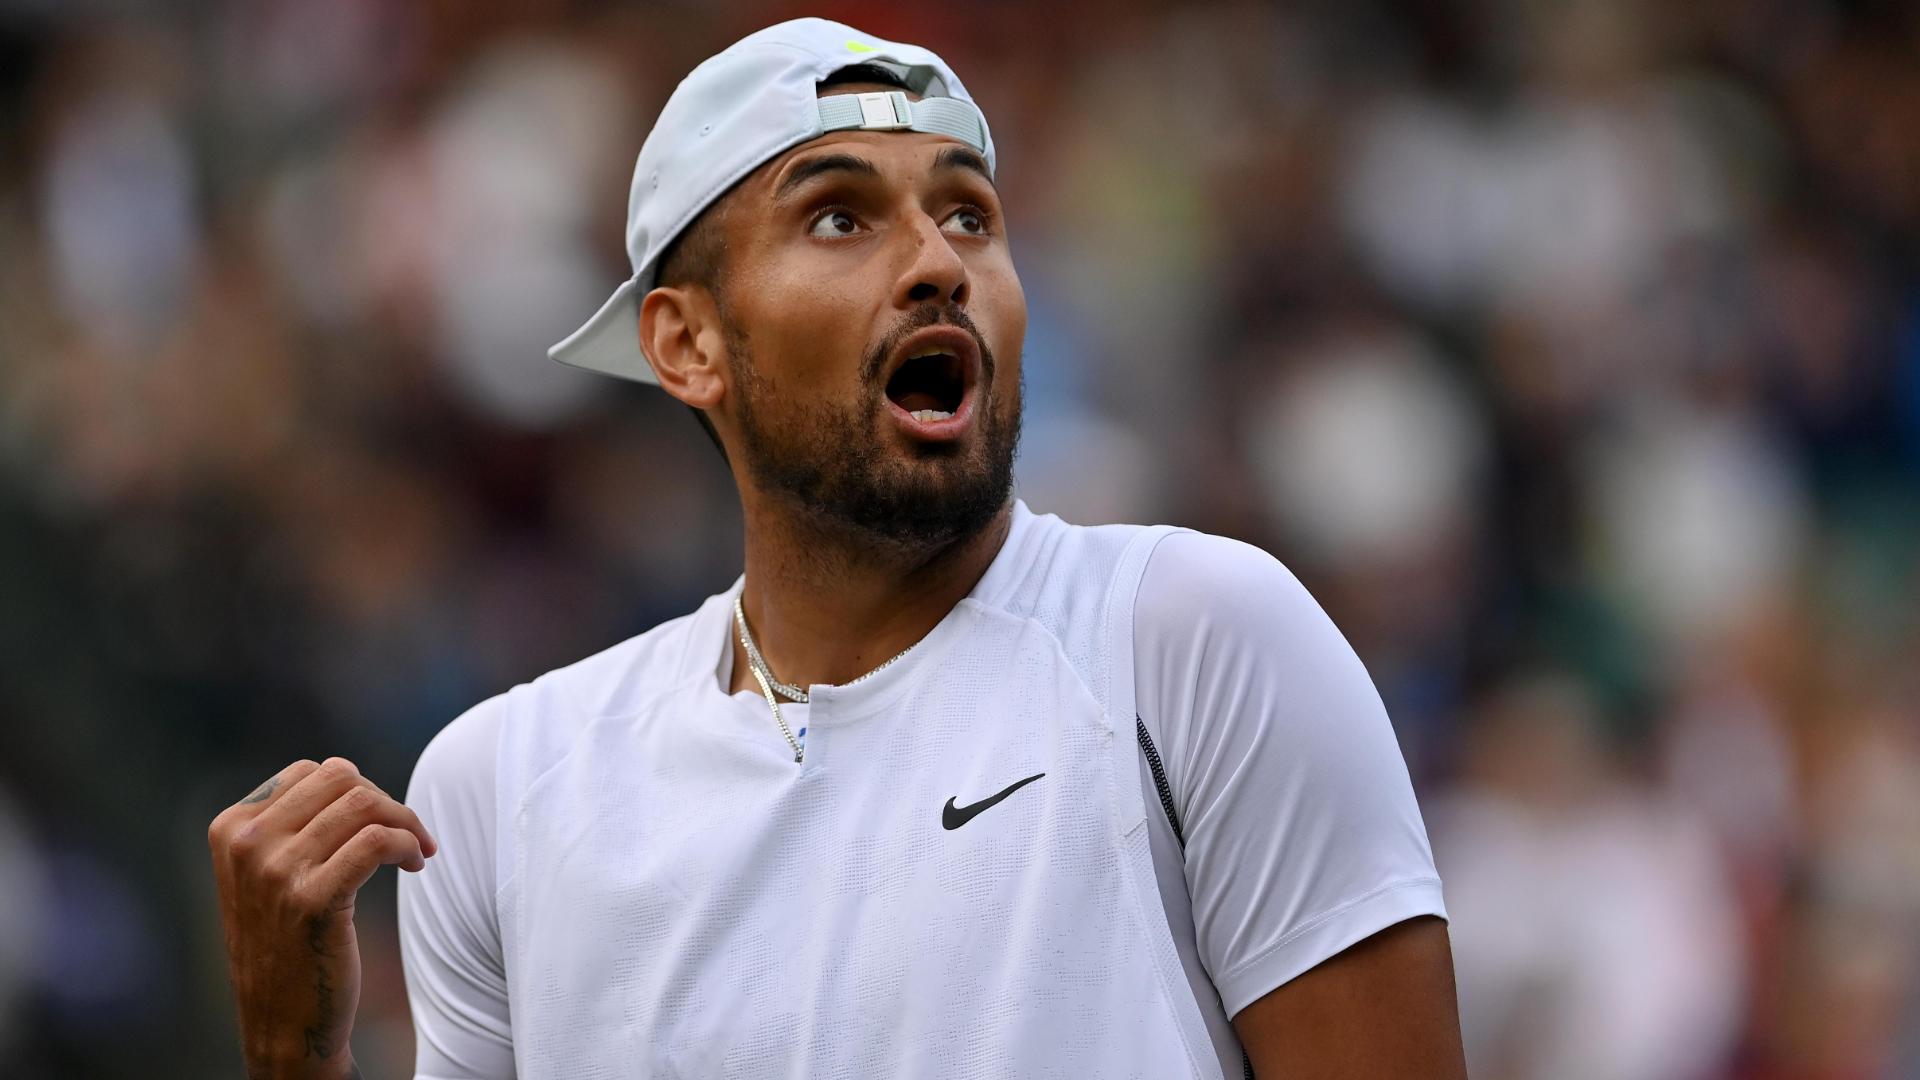 Youre a disgrace! Kyrgios mad at umps after Tsitsipas not defaulted - Stream the Video